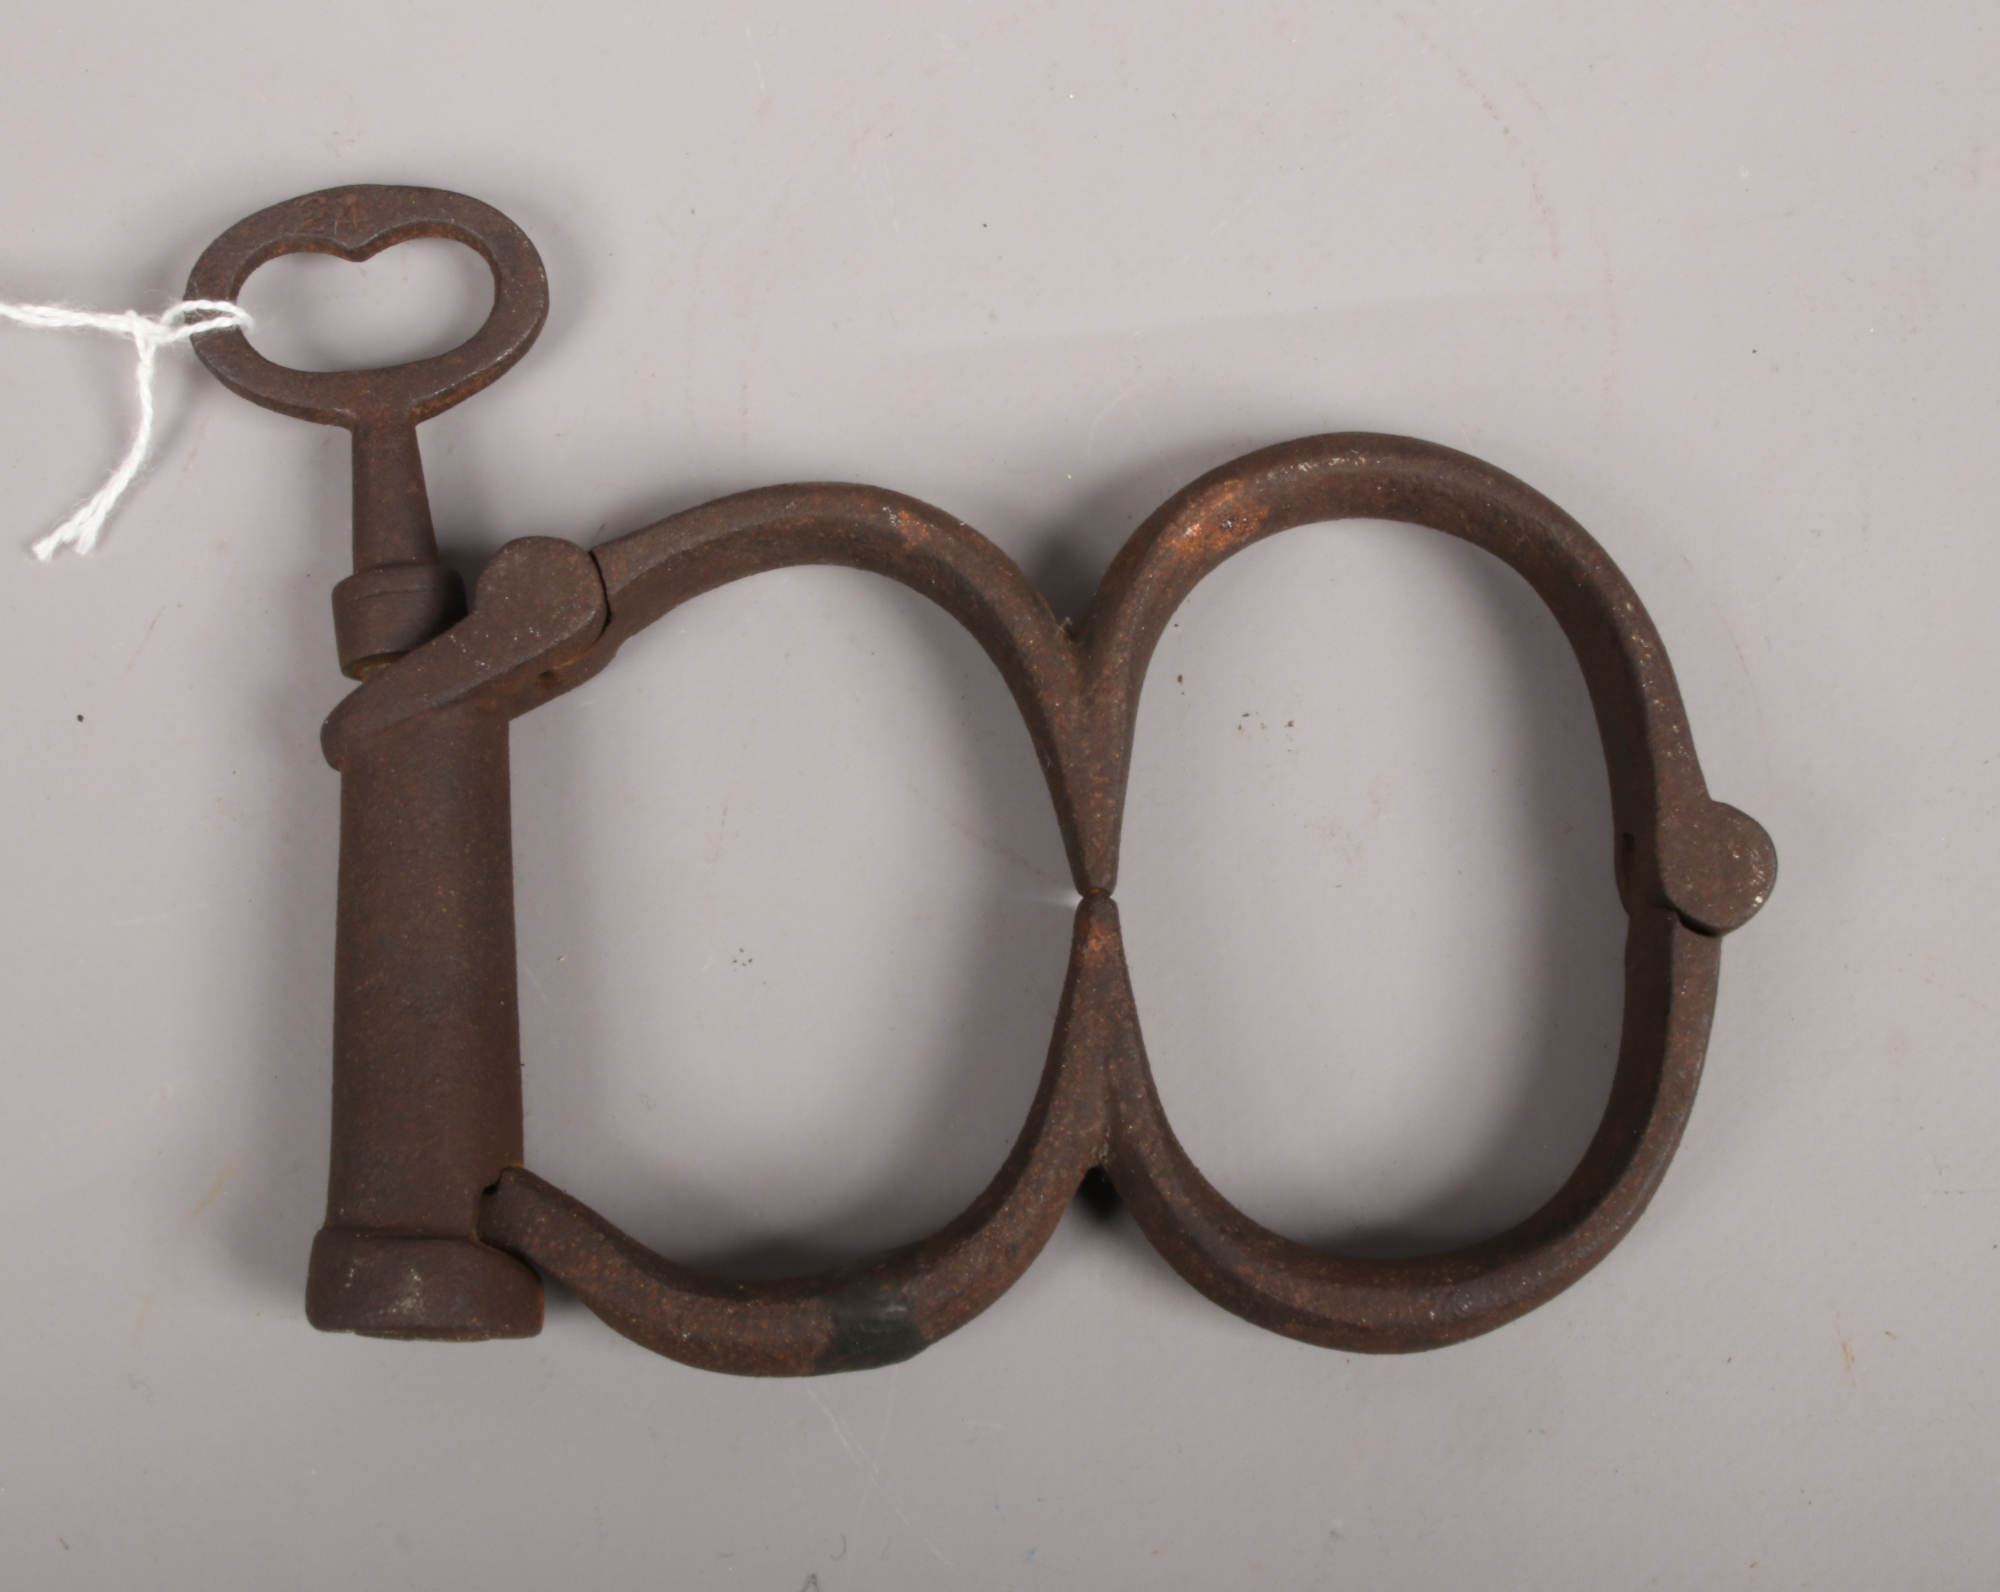 A set of steel 19th century Hiatt handcuffs with keyCondition report intended as a guide only.Cut